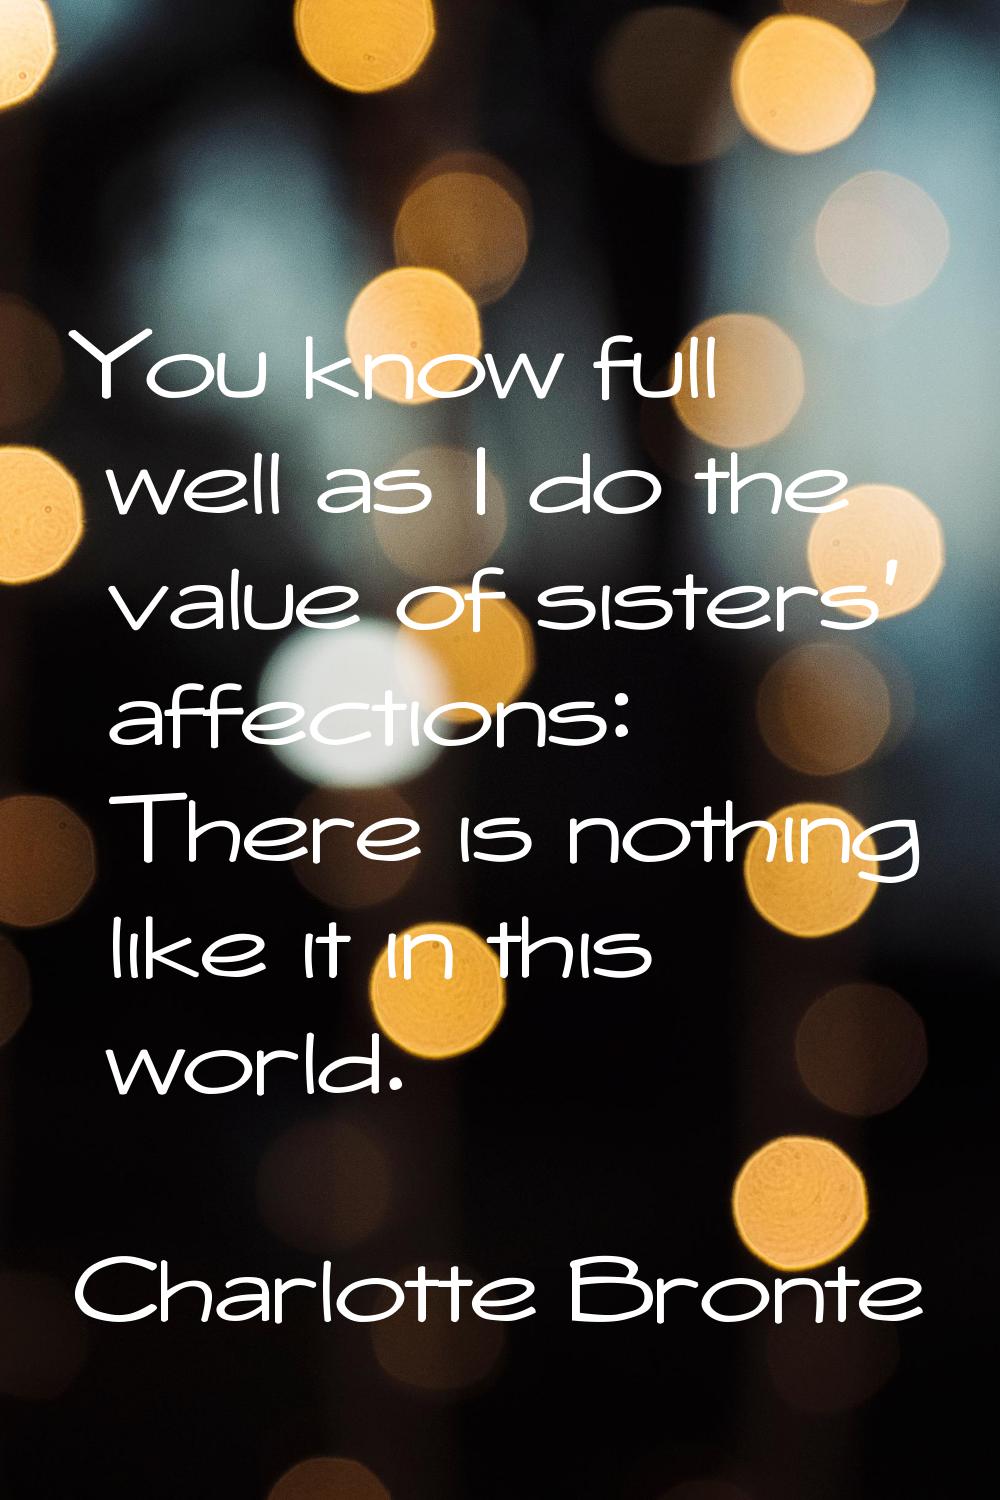 You know full well as I do the value of sisters' affections: There is nothing like it in this world